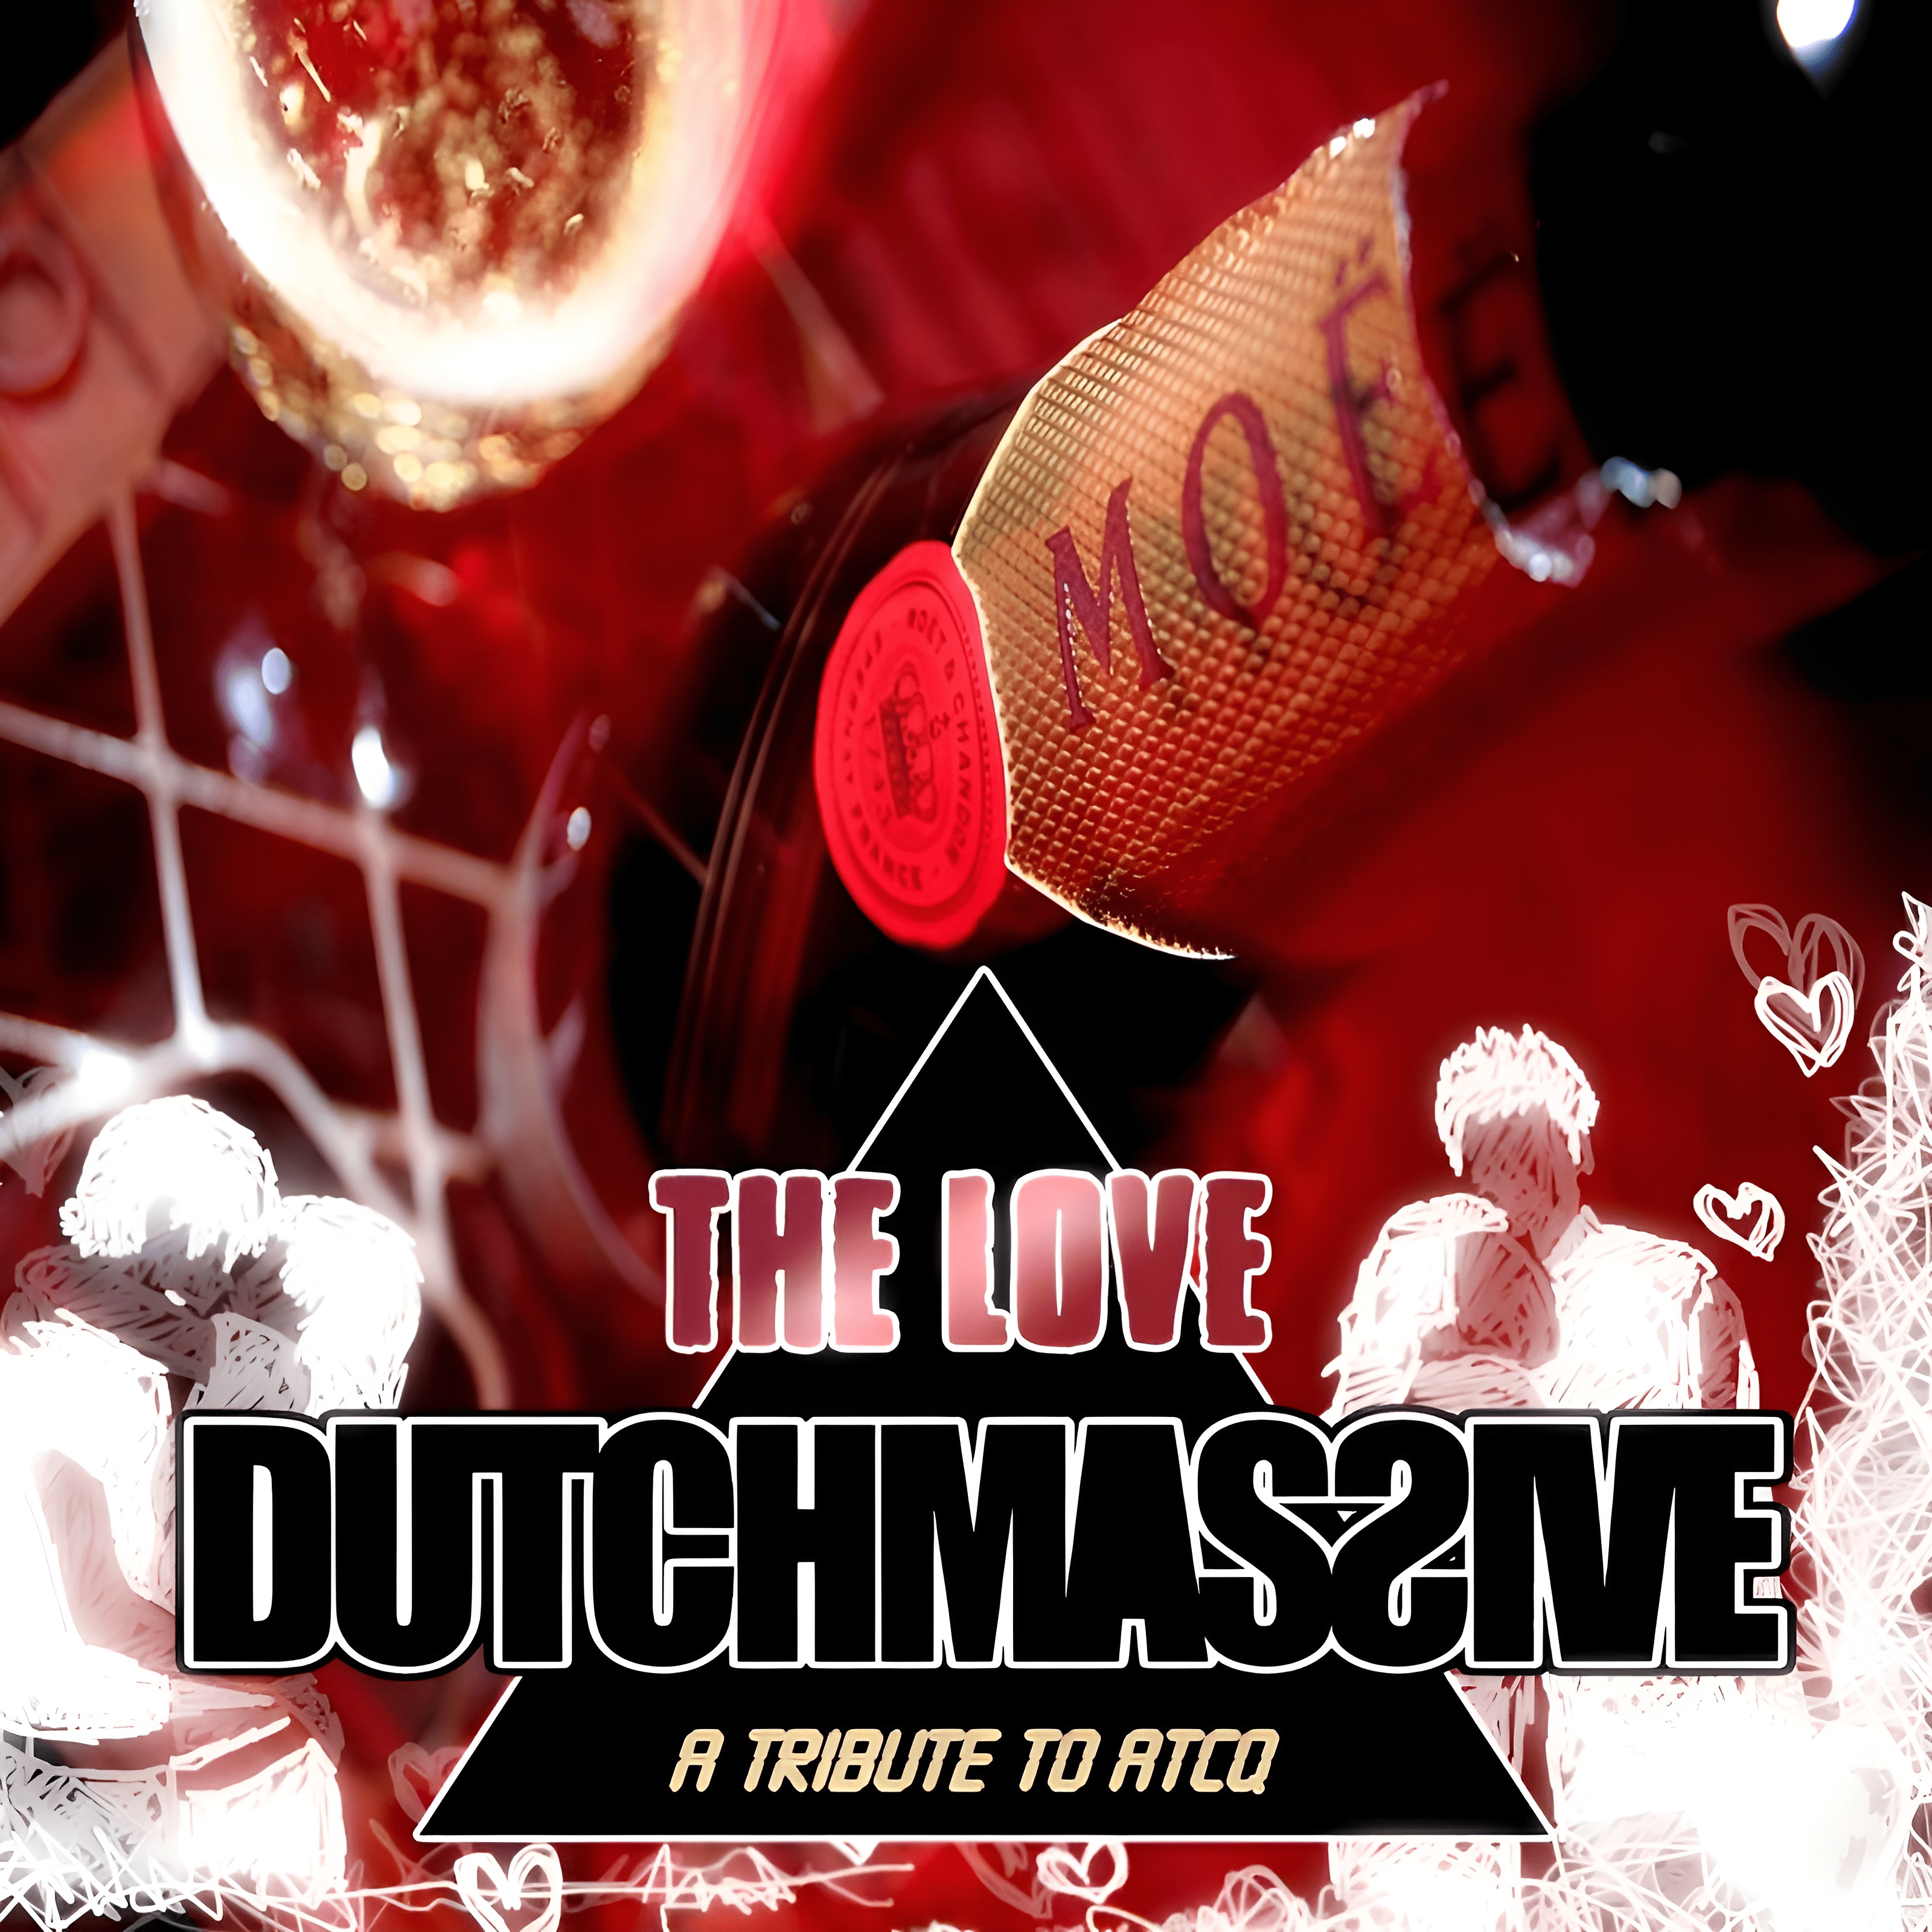 Cover art for Dutchmassive's song: "The Love"  - Produced by Remot